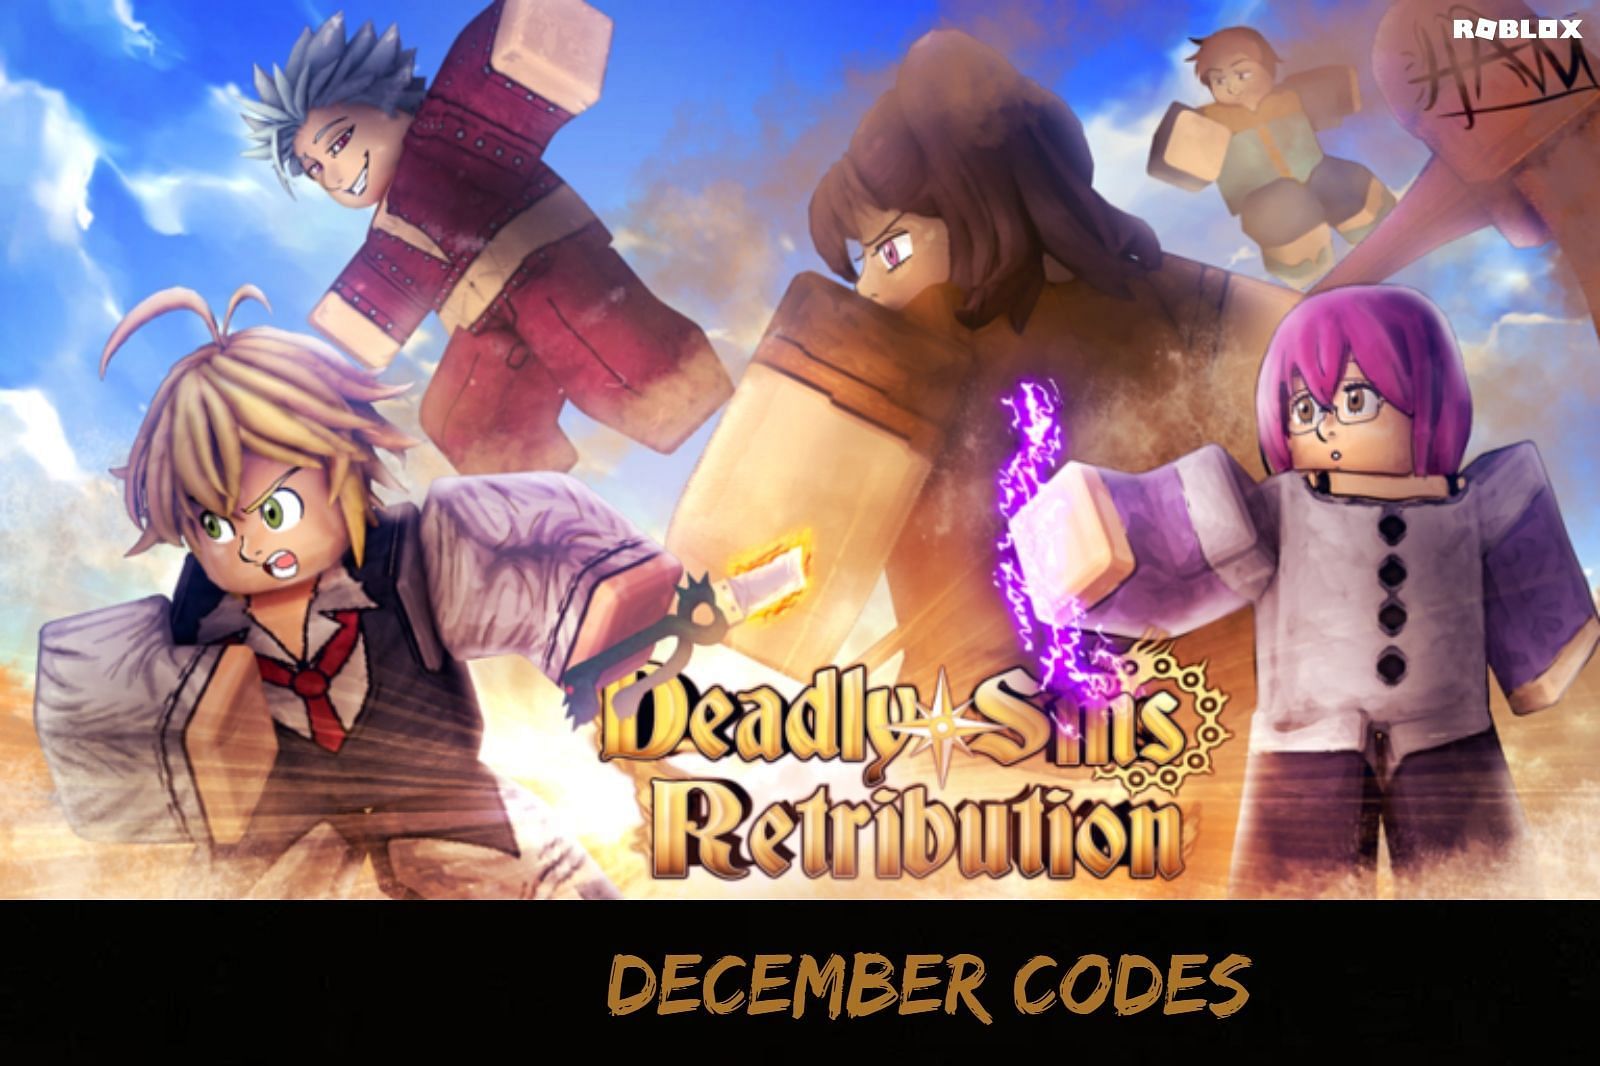 Deadly Sins Retribution codes in Roblox Free spins and resets